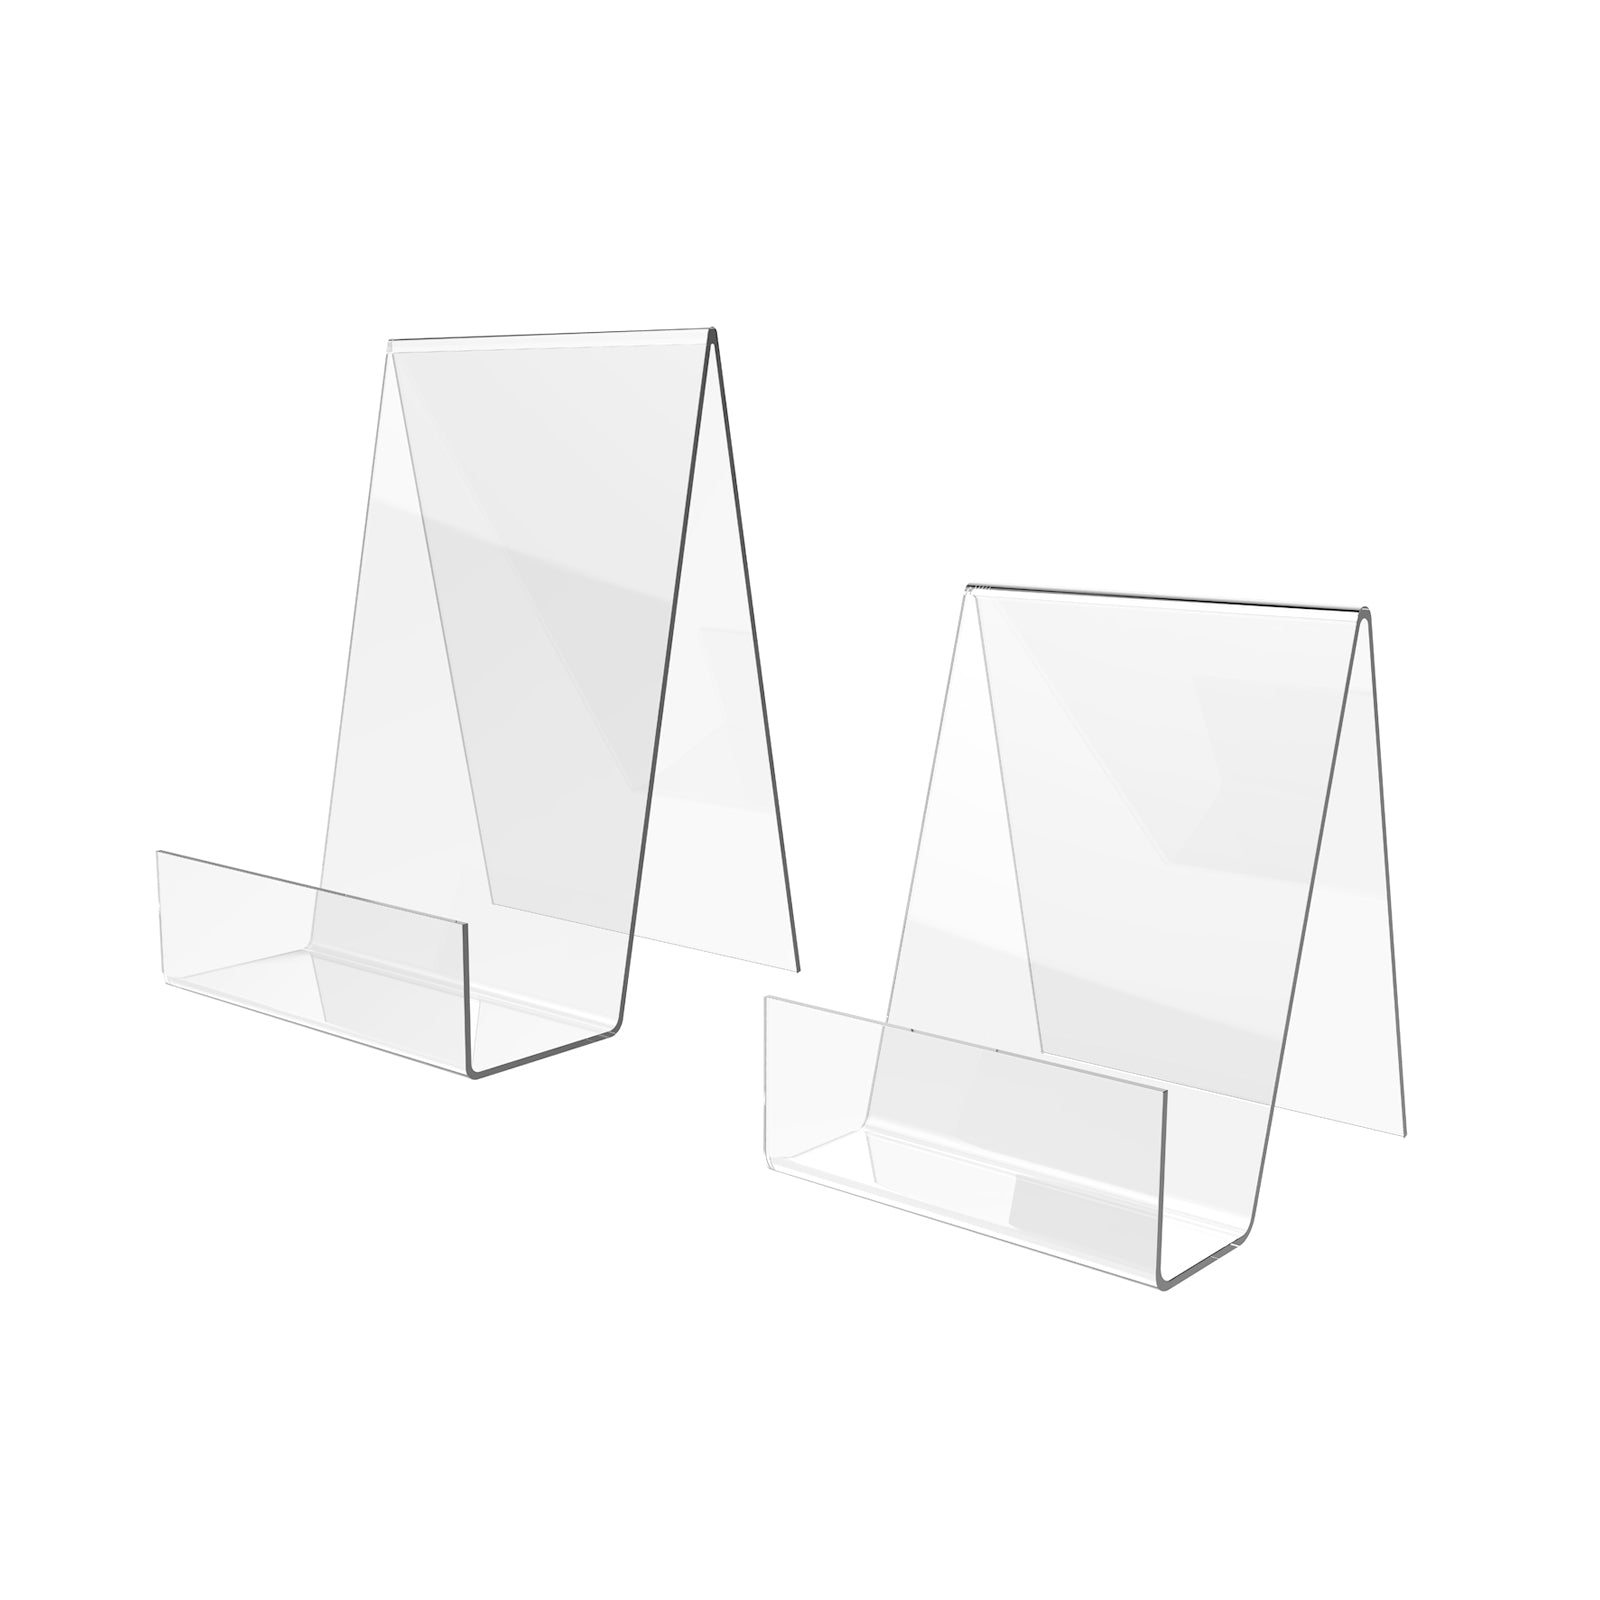 Boloyo Assemble Acrylic Book Stand ,4PC Clear Acrylic Display Easel fo